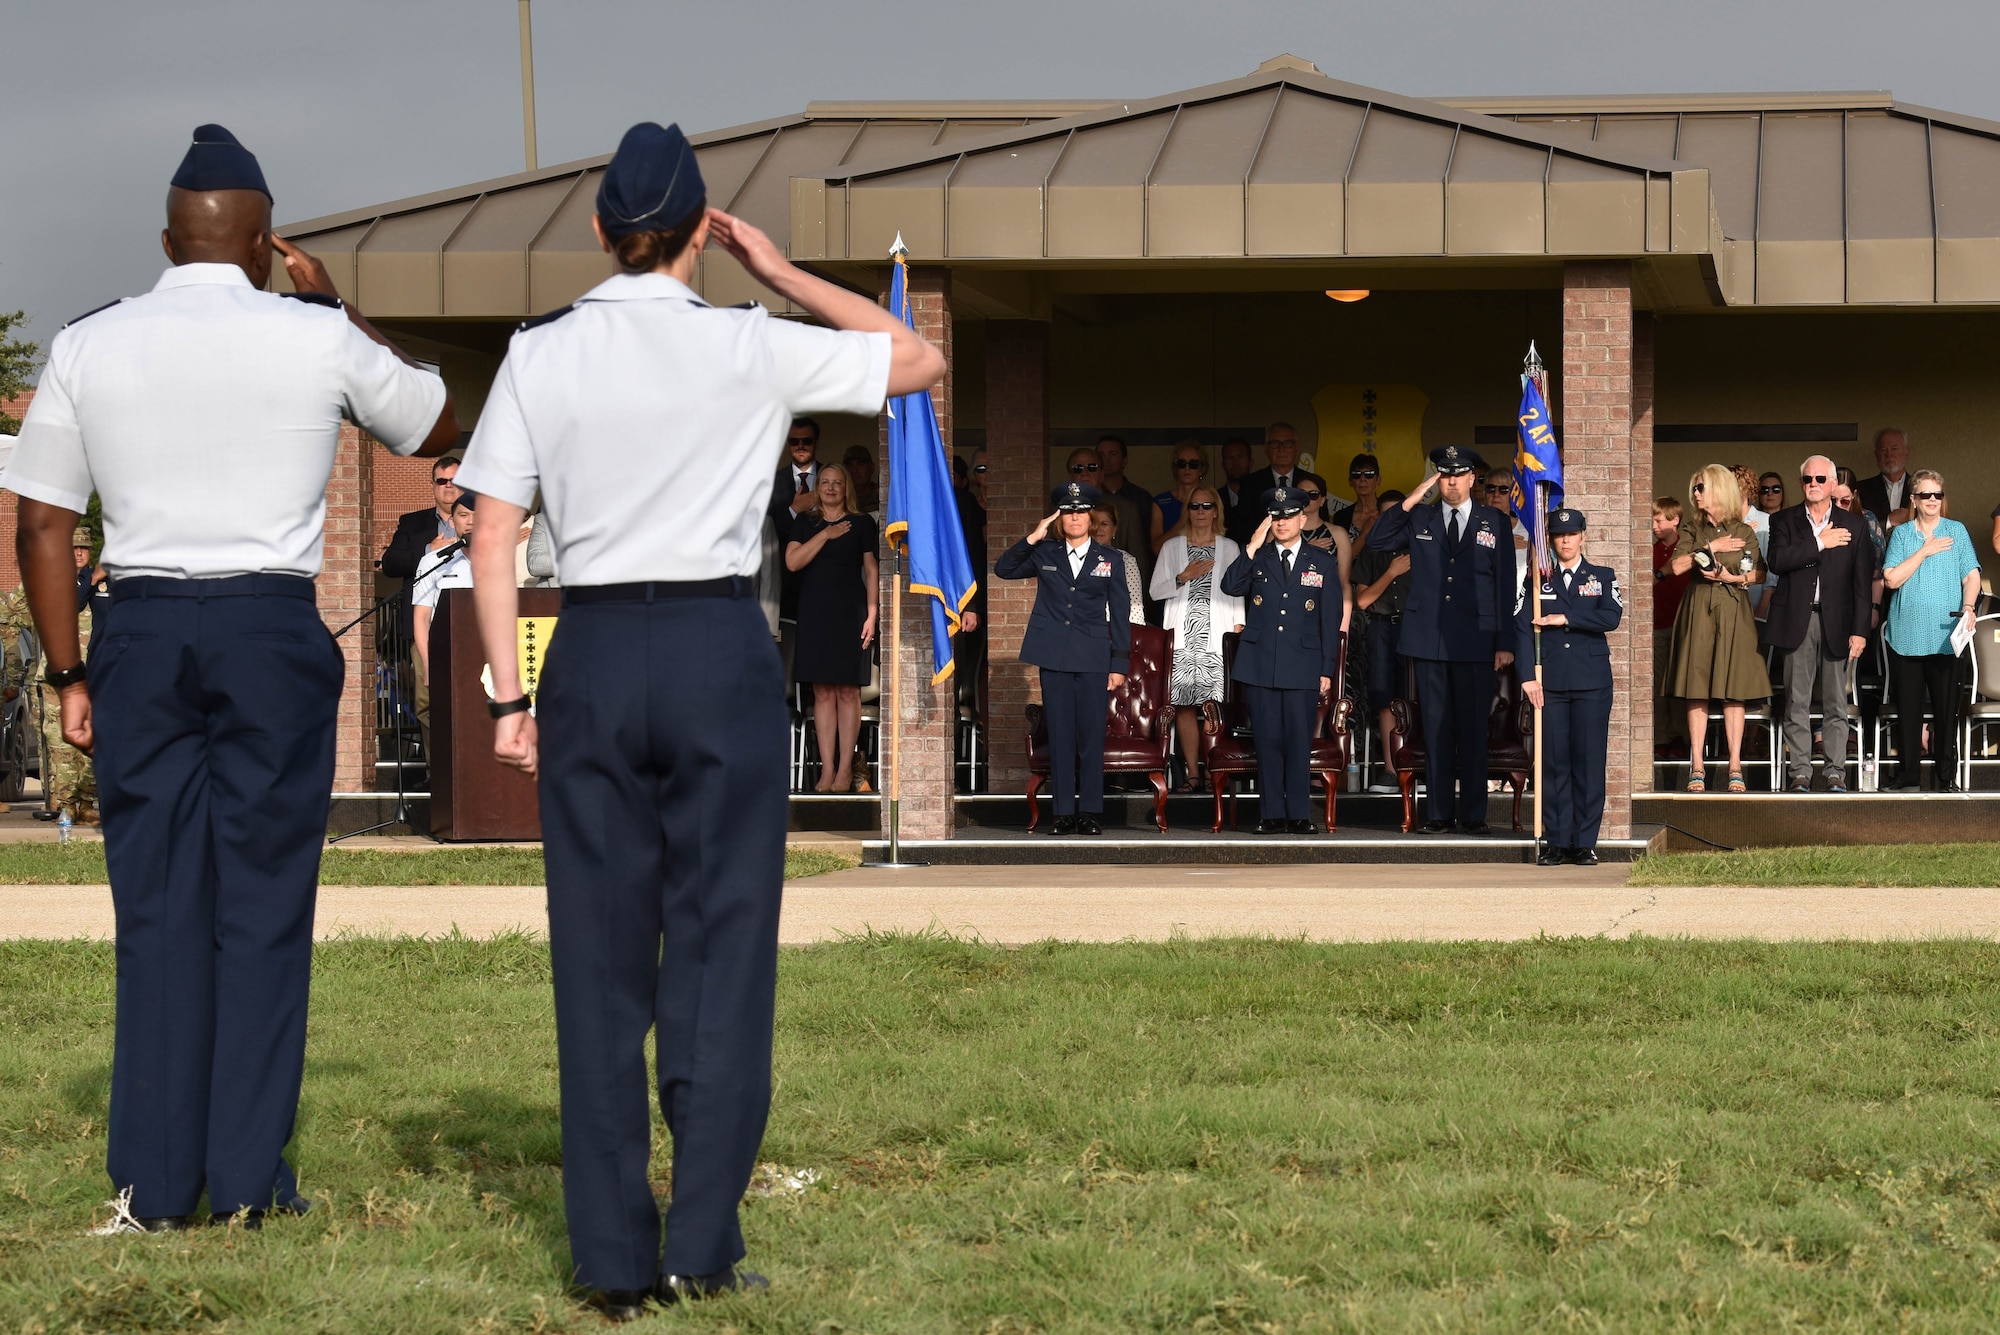 U.S. Air Force Col. James Finlayson, 17th Training Wing vice commander, salutes the official party during the 17th TRW change of command ceremony on Goodfellow Air Force Base, Texas, July 13, 2021. The change of command ceremony is a military tradition, which illustrates the formal transfer of authority by the passing the guidon from departing commander to incoming commander. (U.S. Air Force photo by Senior Airman Jermaine Ayers)